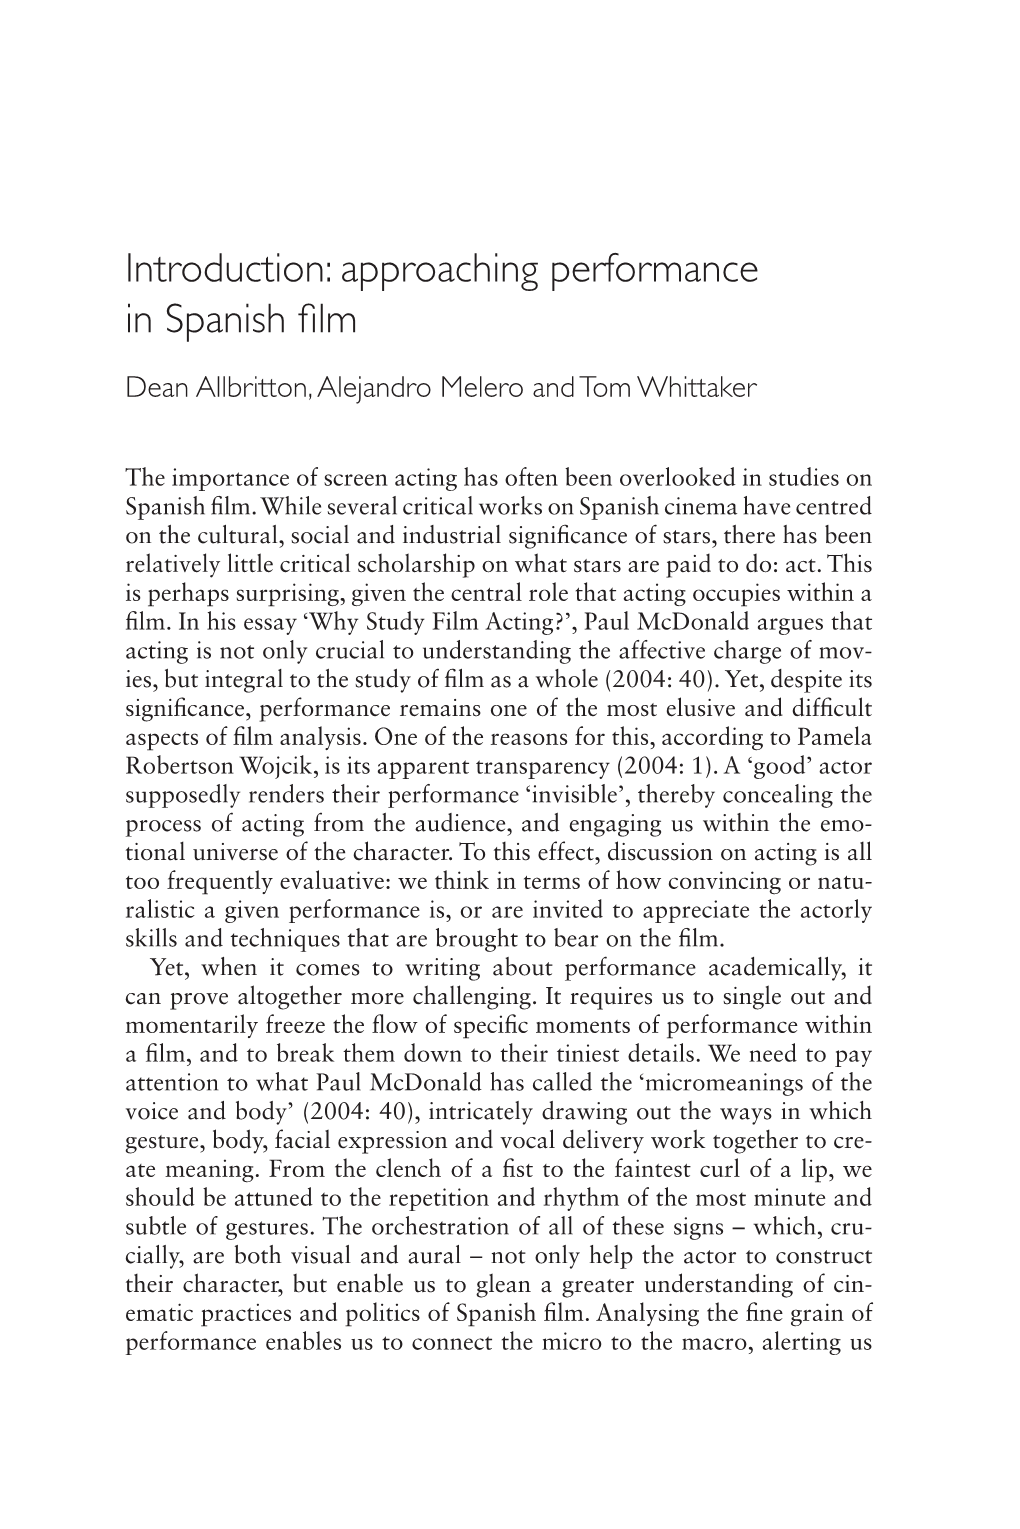 Introduction: Approaching Performance in Spanish Film